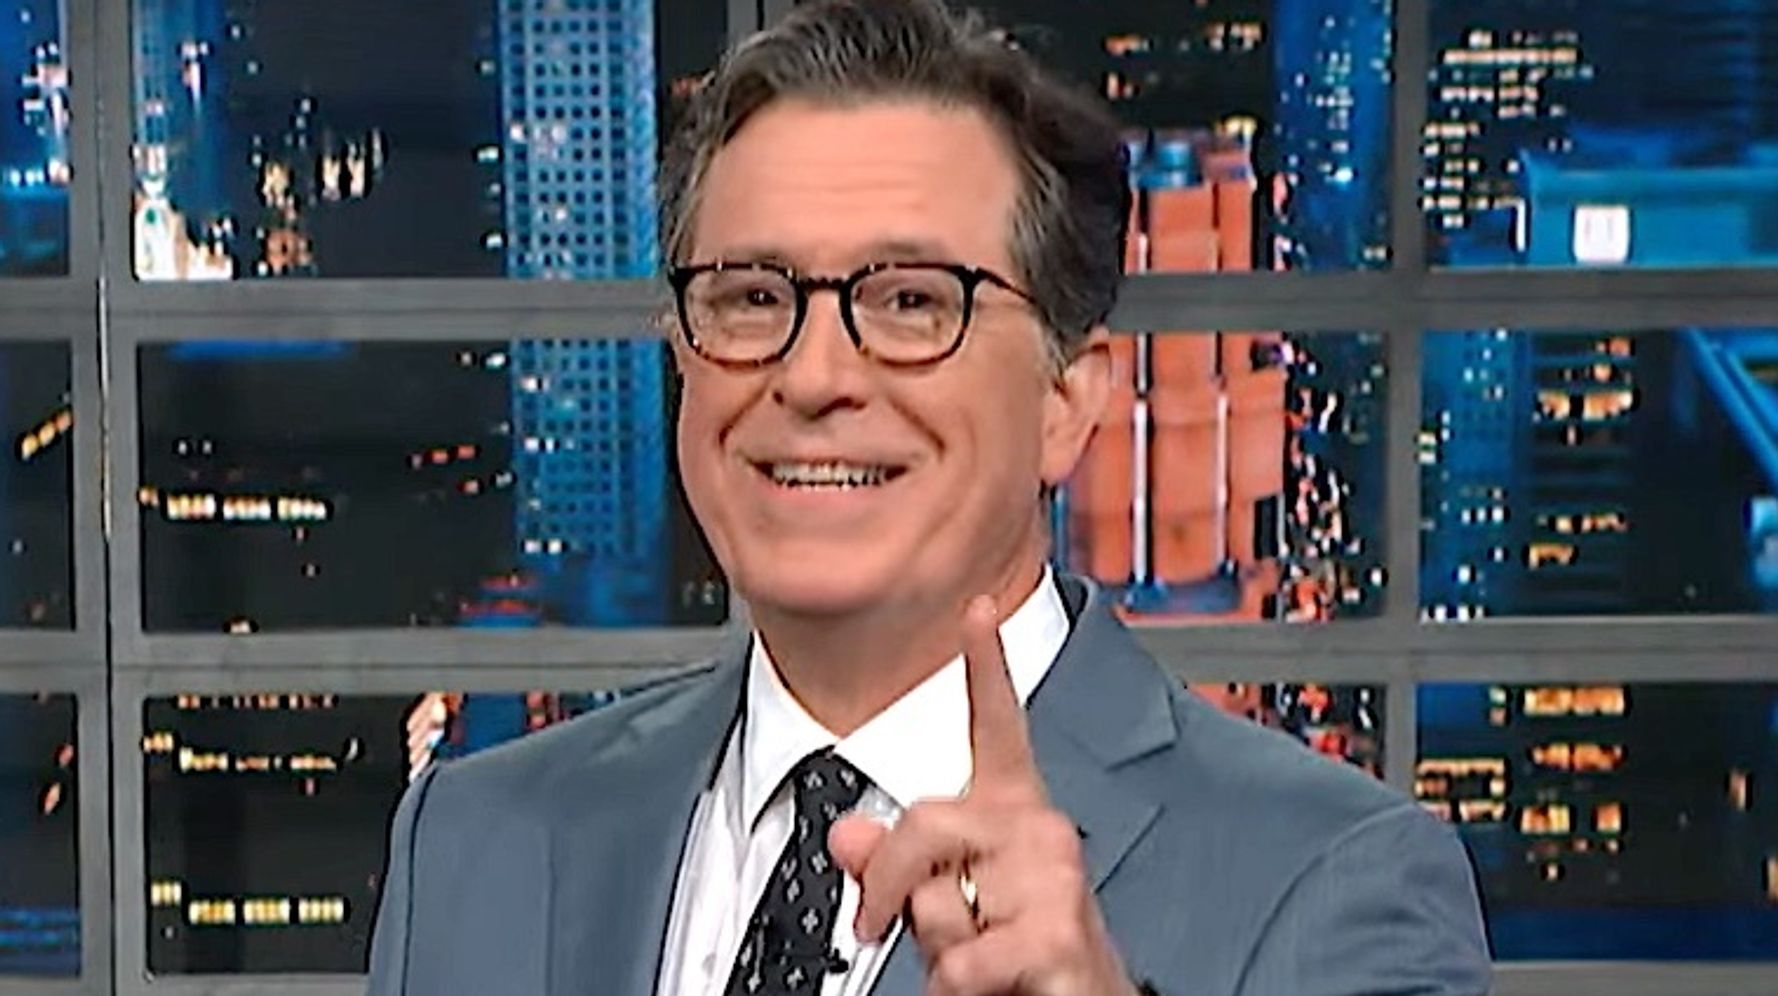 Stephen Colbert Mocks Trump Over The 'So Embarrassing' Moment Revealed In New Book